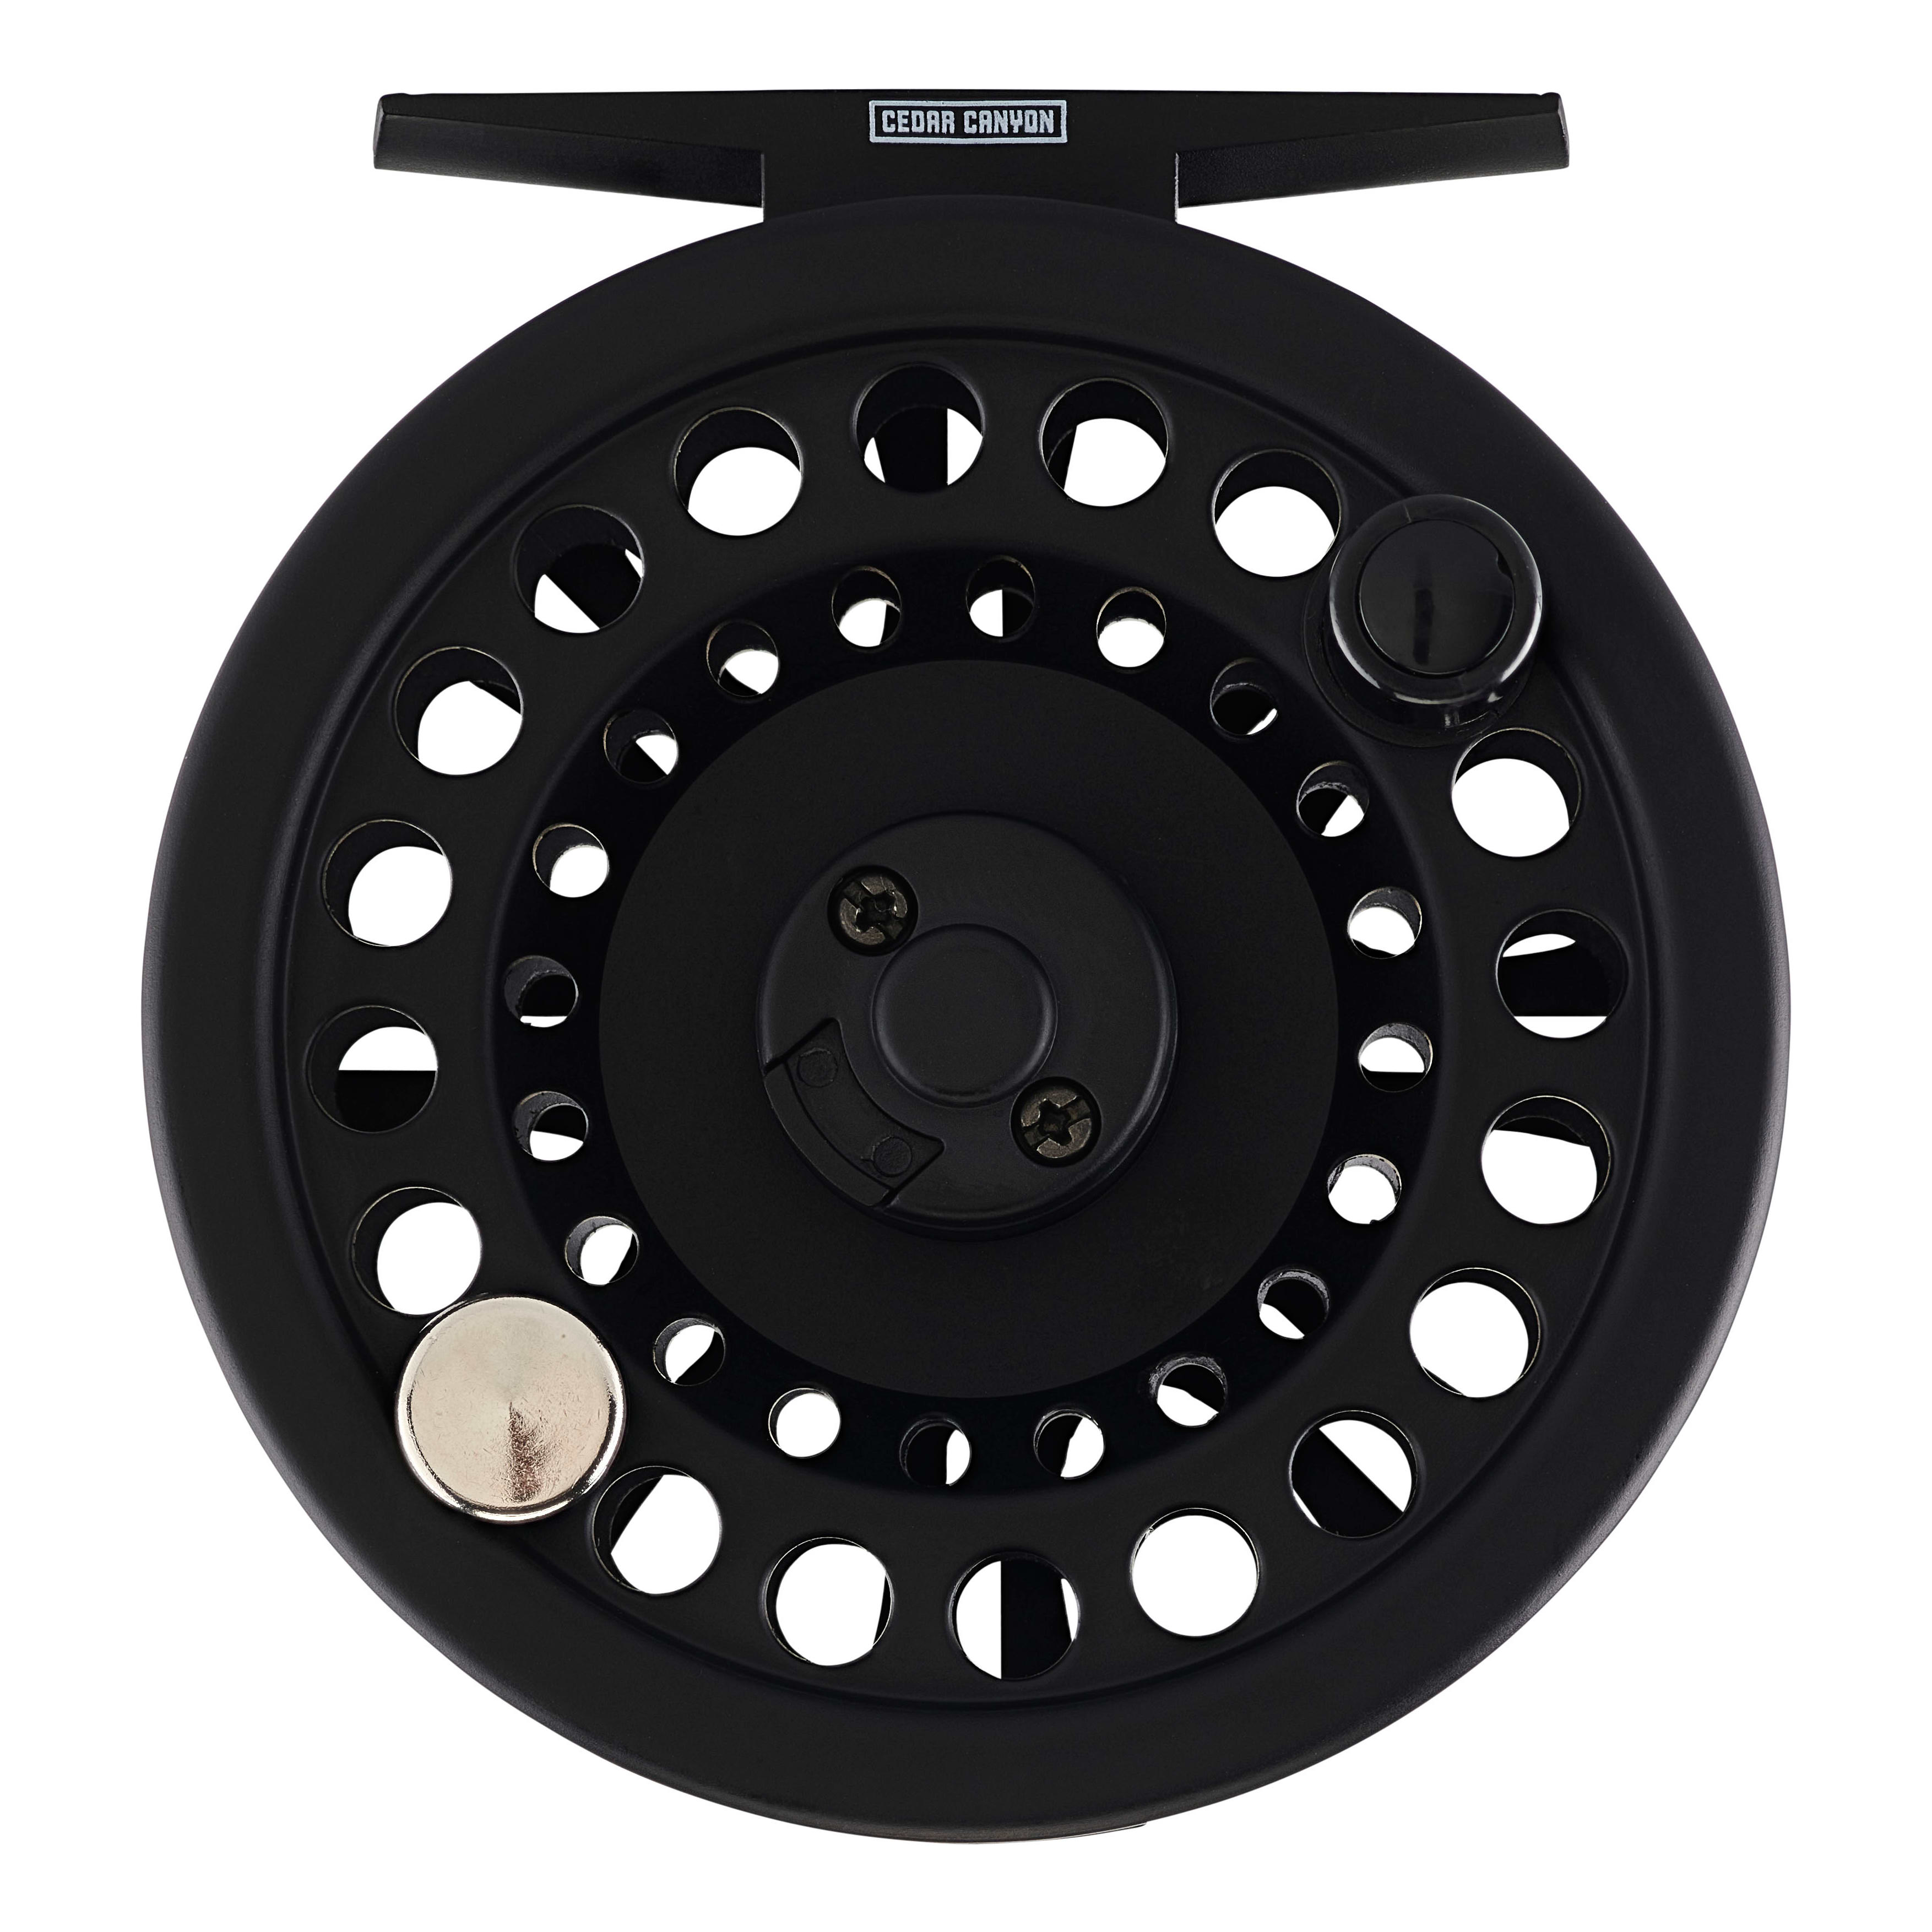 Cabelas RLS4 9-10wt Fly Reel Nice Excellent New Unused Condition in Box 